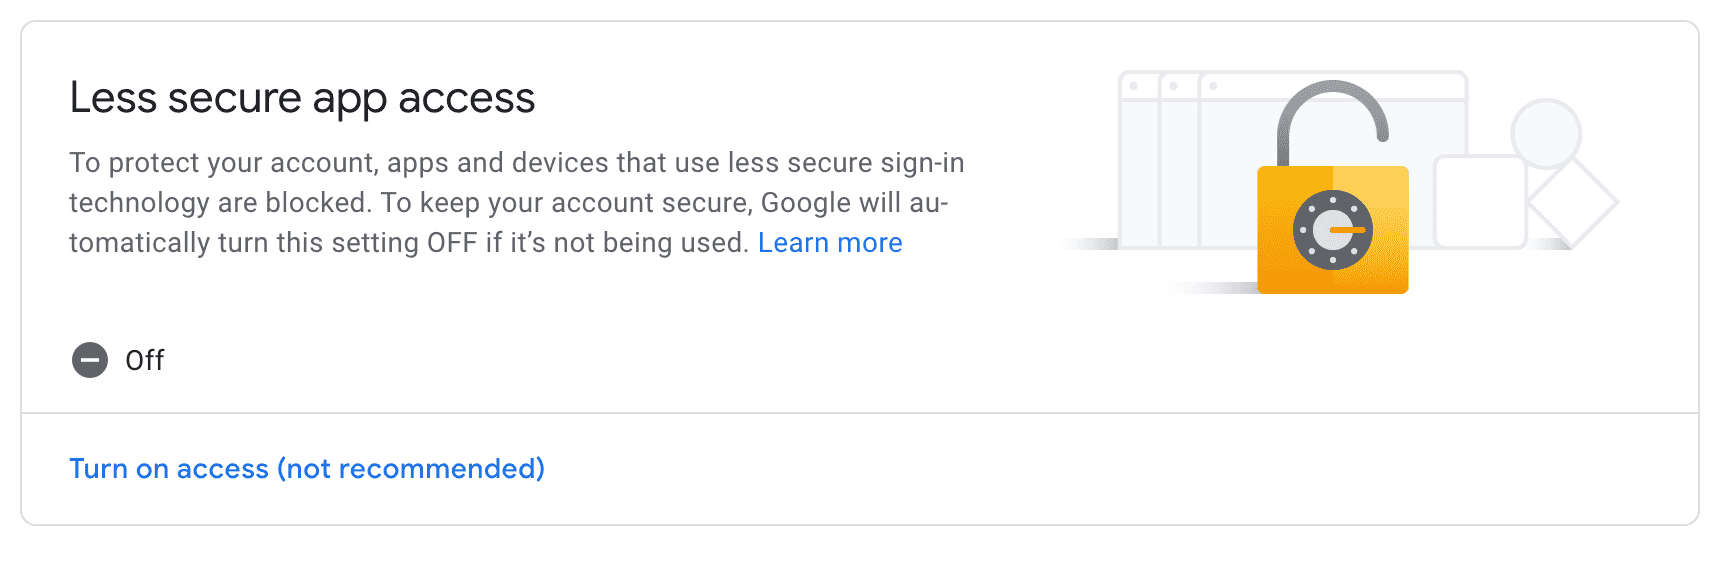 less_secure_app_access_main_page.png